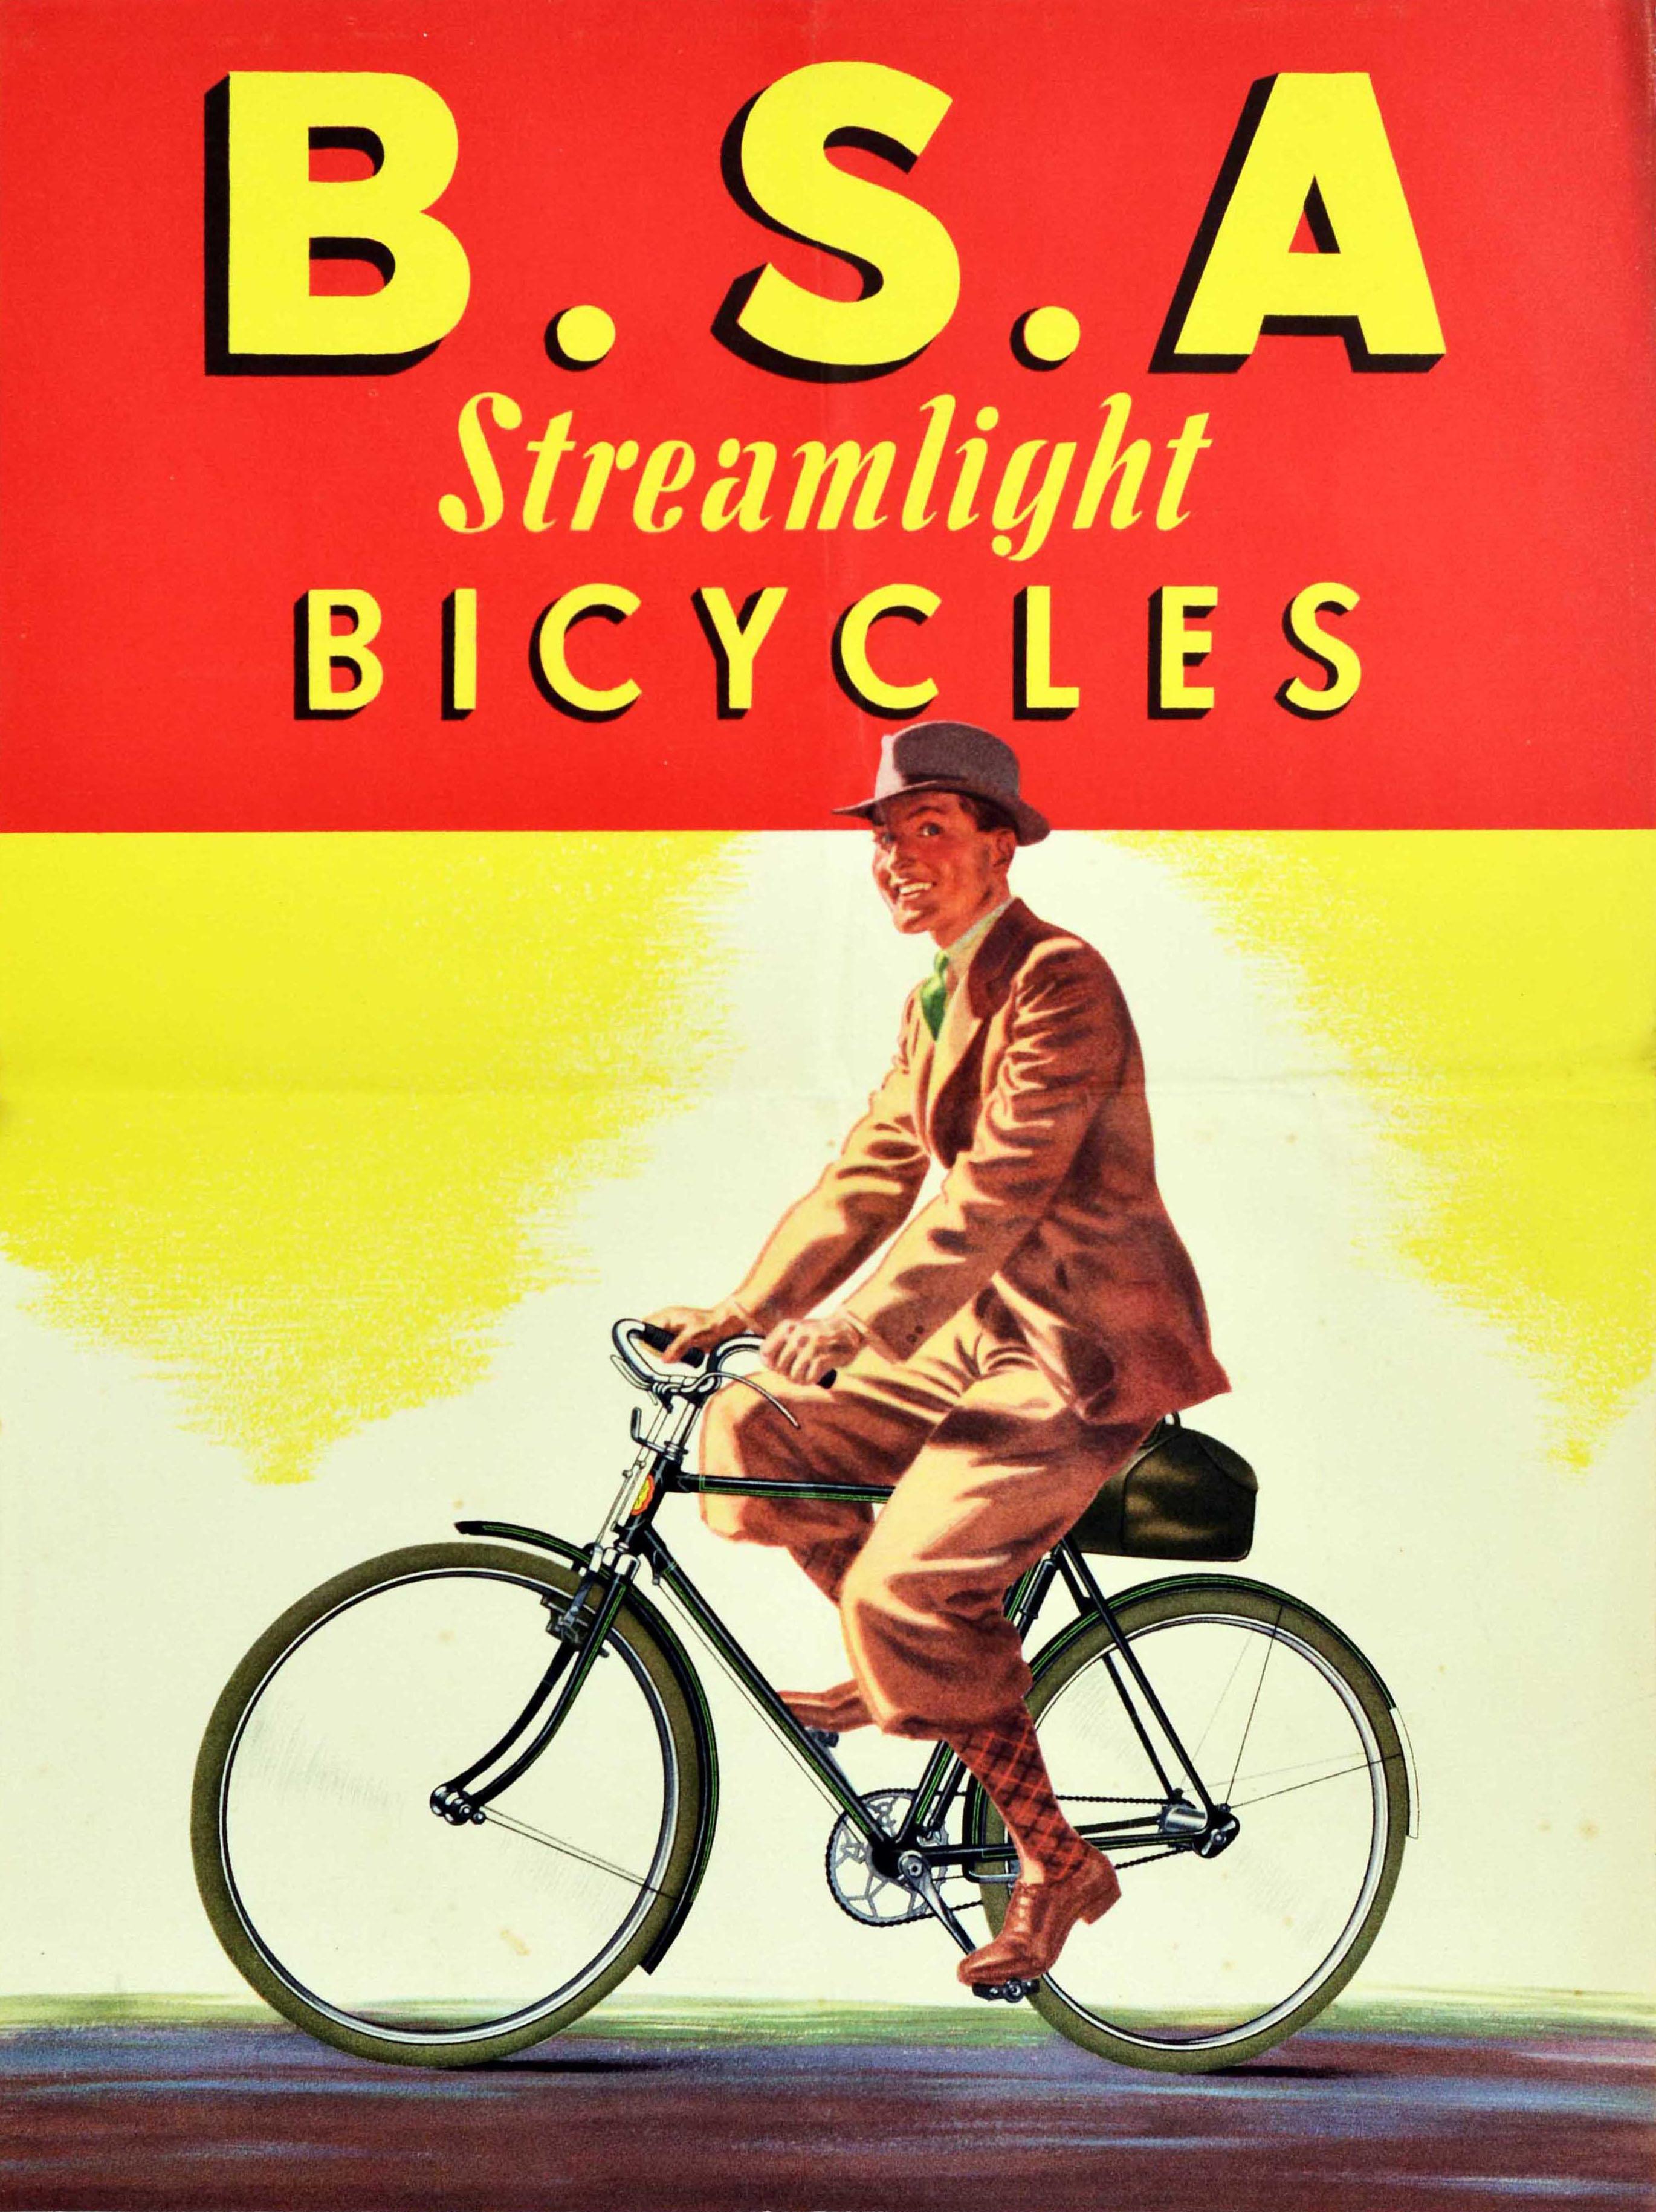 Unknown Print - Original Vintage Advertising Poster BSA Steamlight Bicycles Cycling Design Art